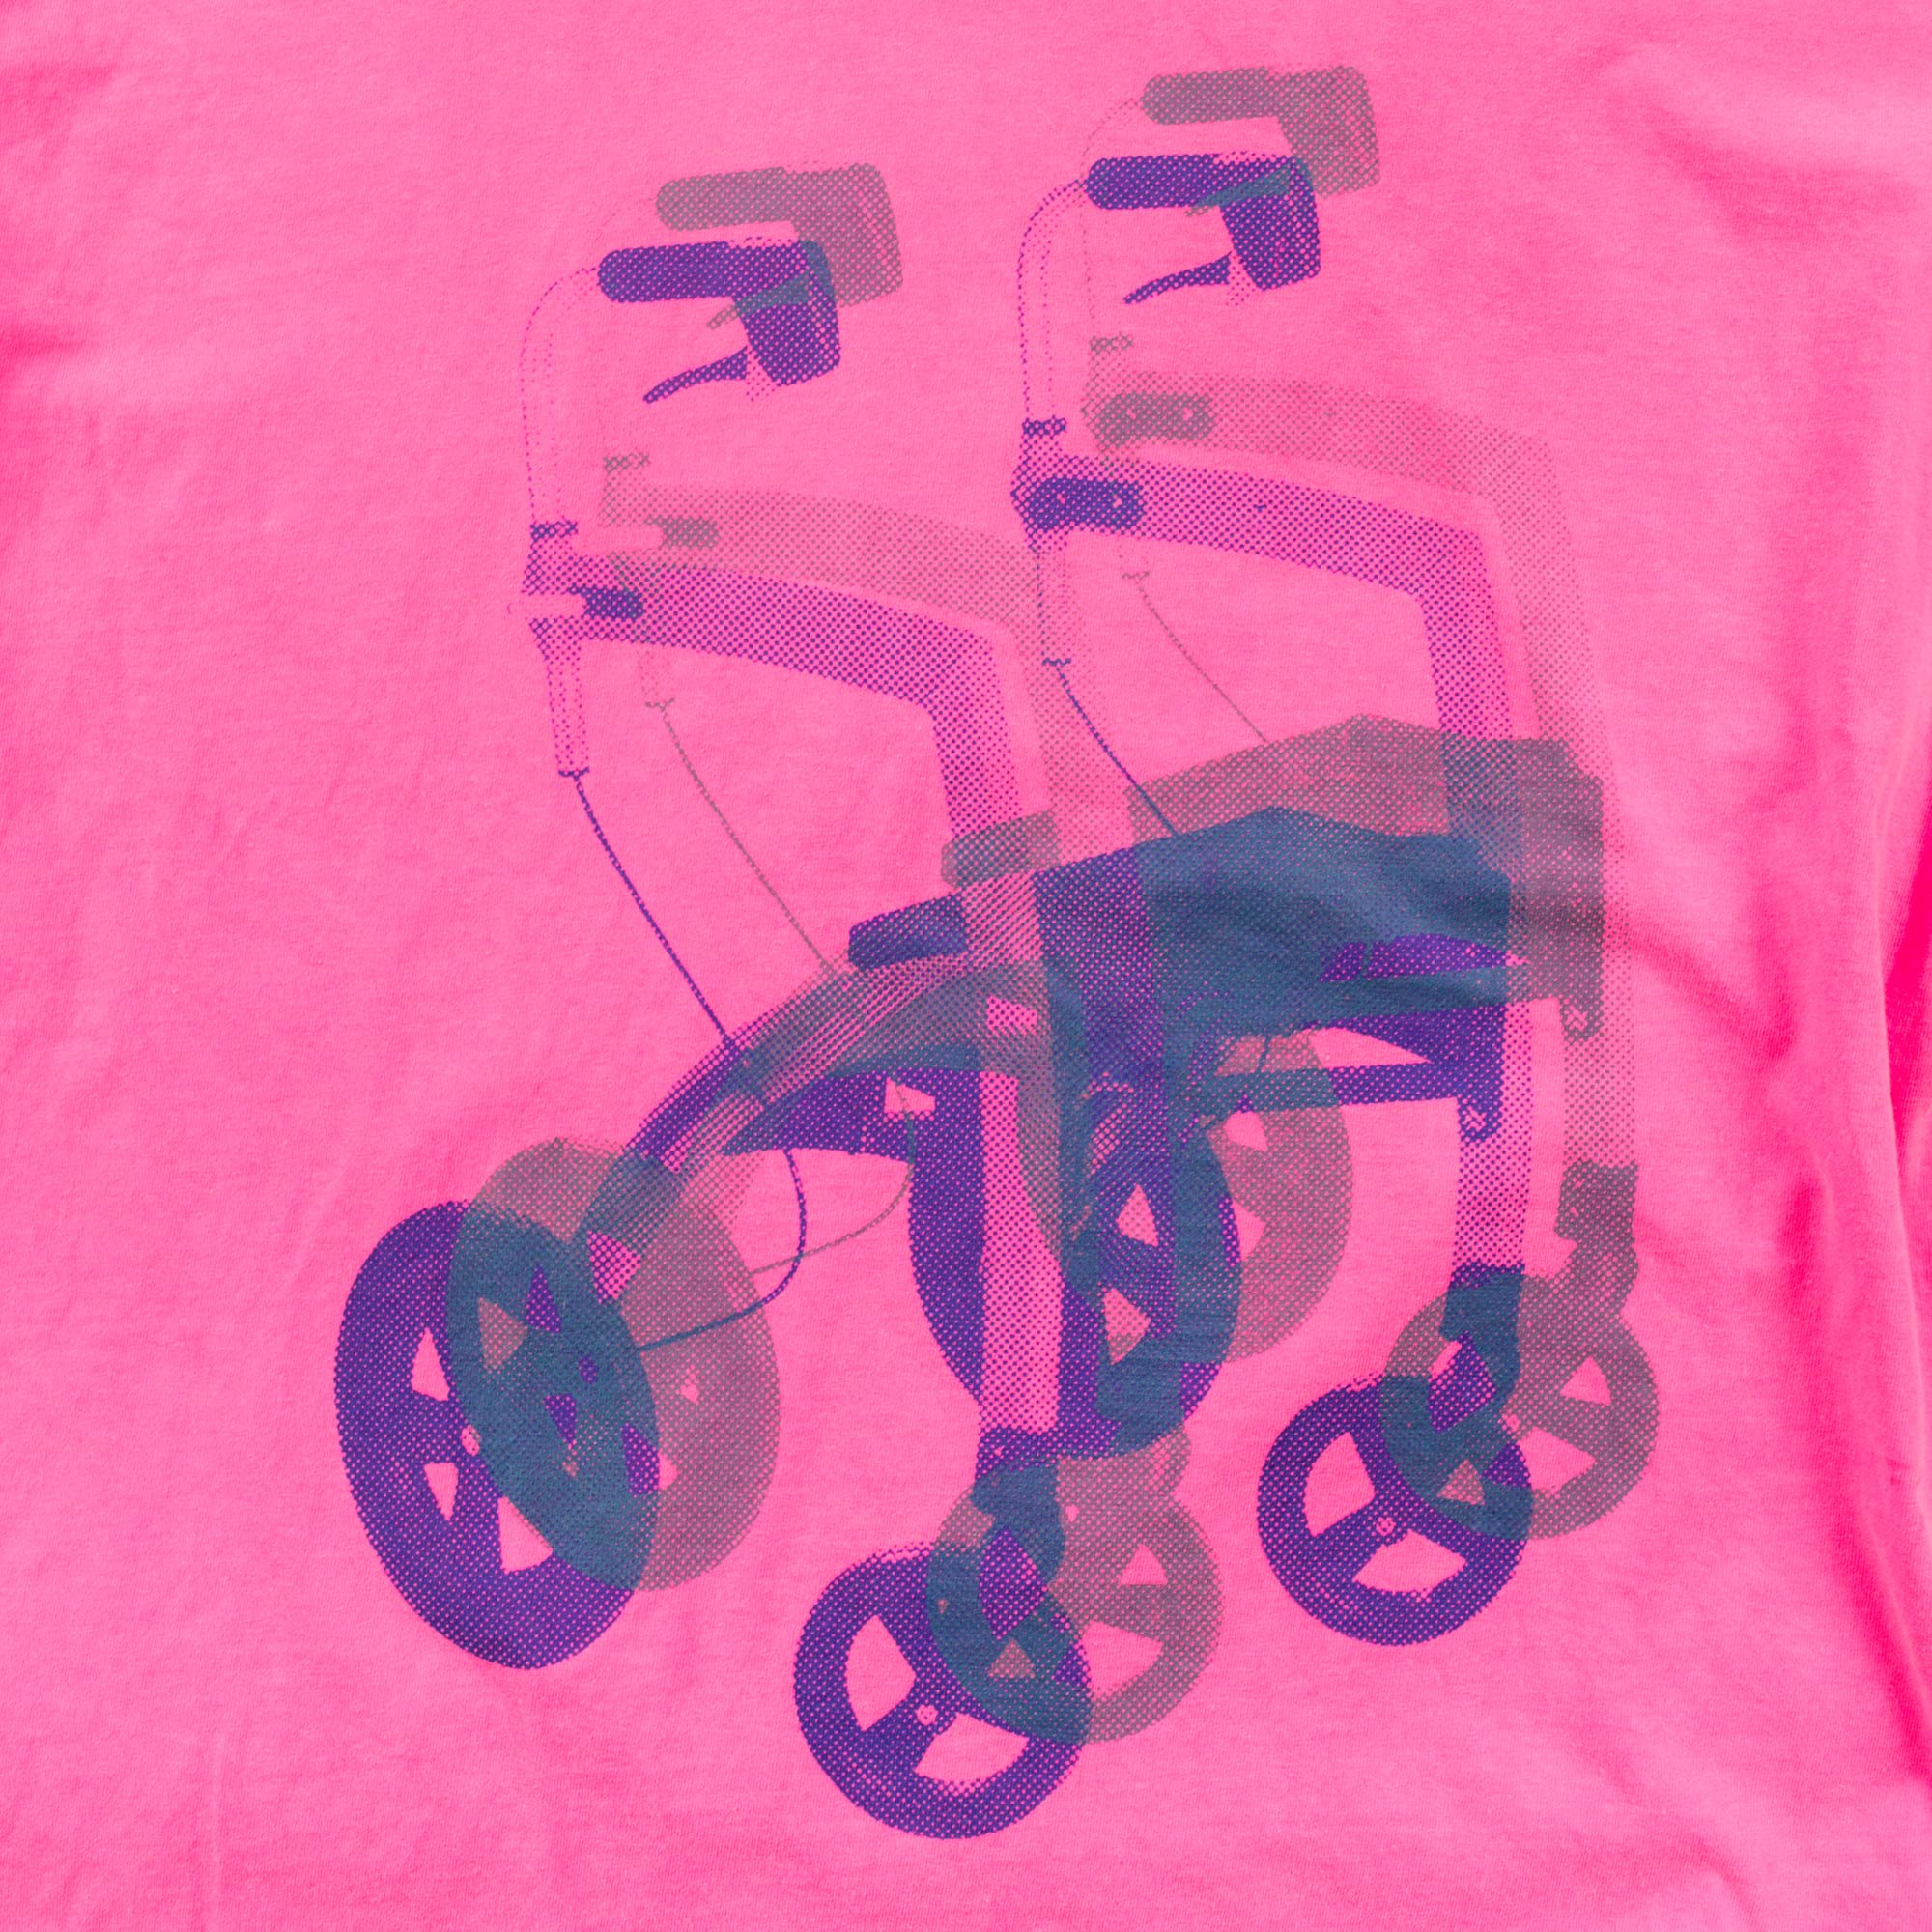 starstyling zoeppritz walking frame T-Shirt, Farbe pink, Material Baumwolle in Groesse S